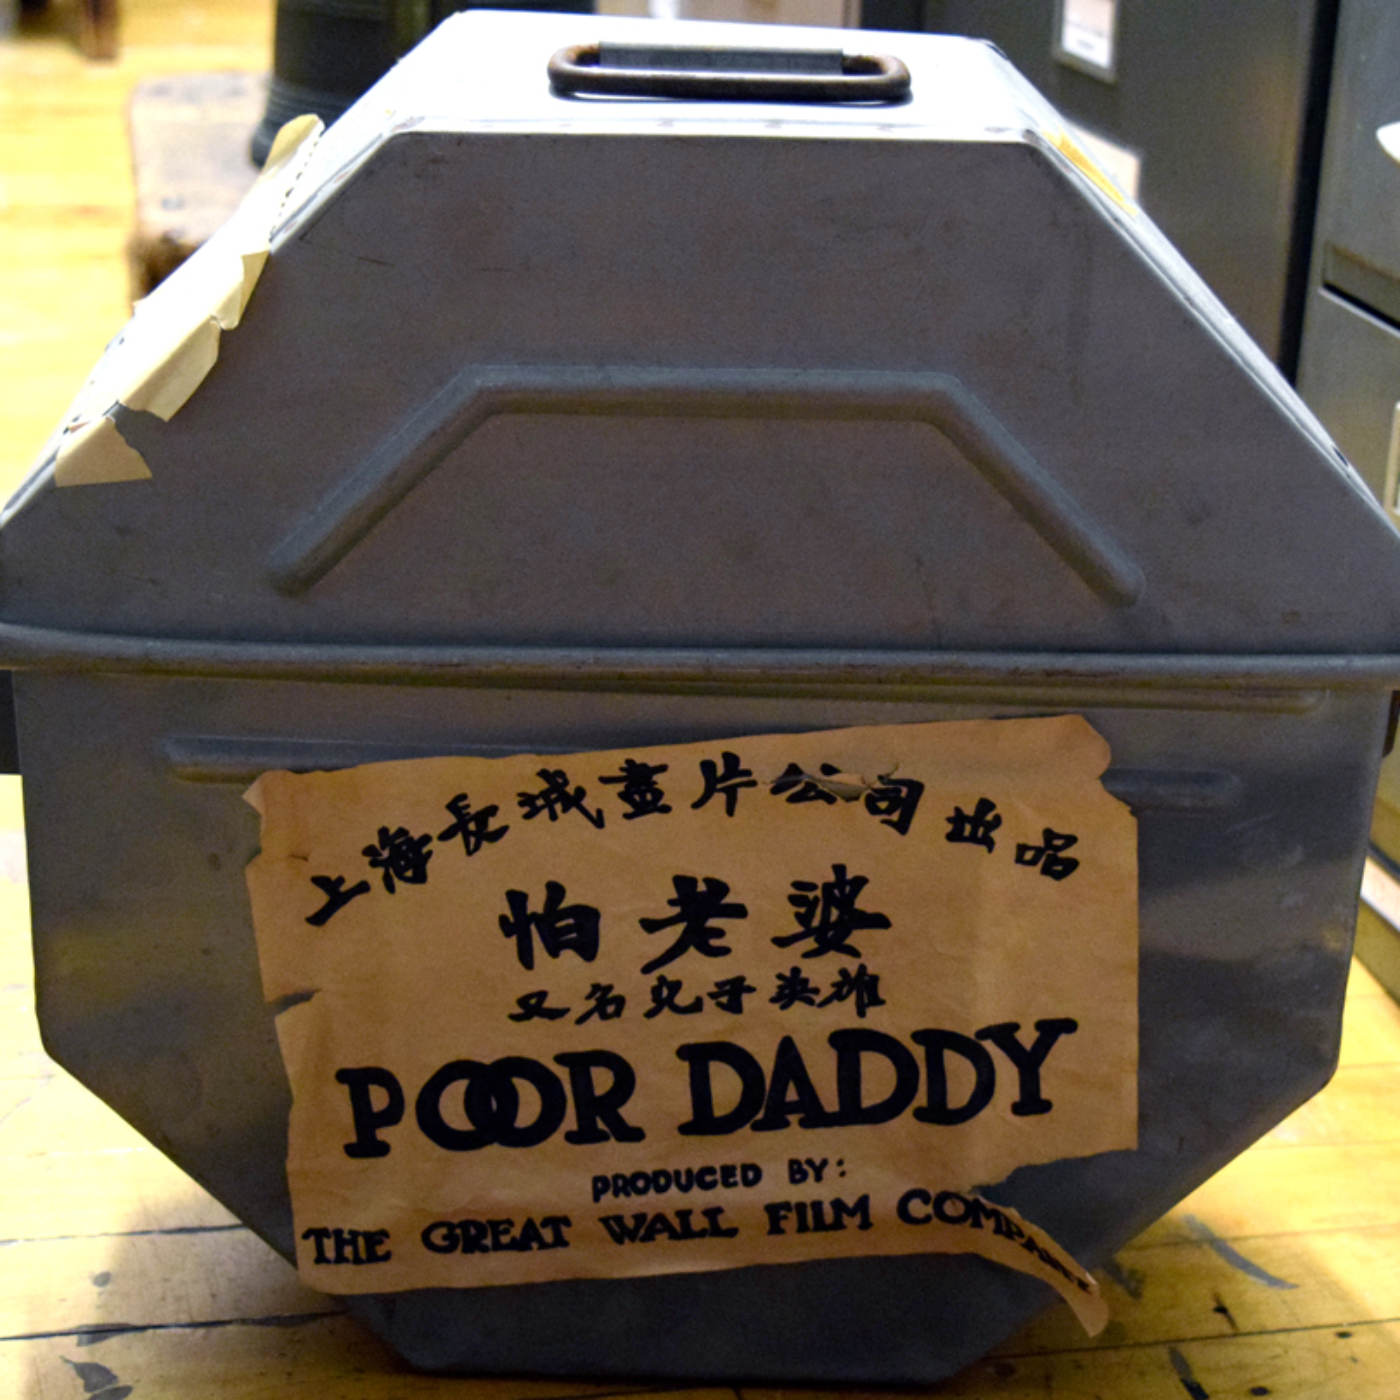 1993.007.070 Film reel plus canister of "Poor Daddy," an original silent film produced by the Great Wall Film Company in 1929. Directed by Yang Xiao Zhong. Museum of Chinese in America (MOCA) Sun Sing Theatre Collection.